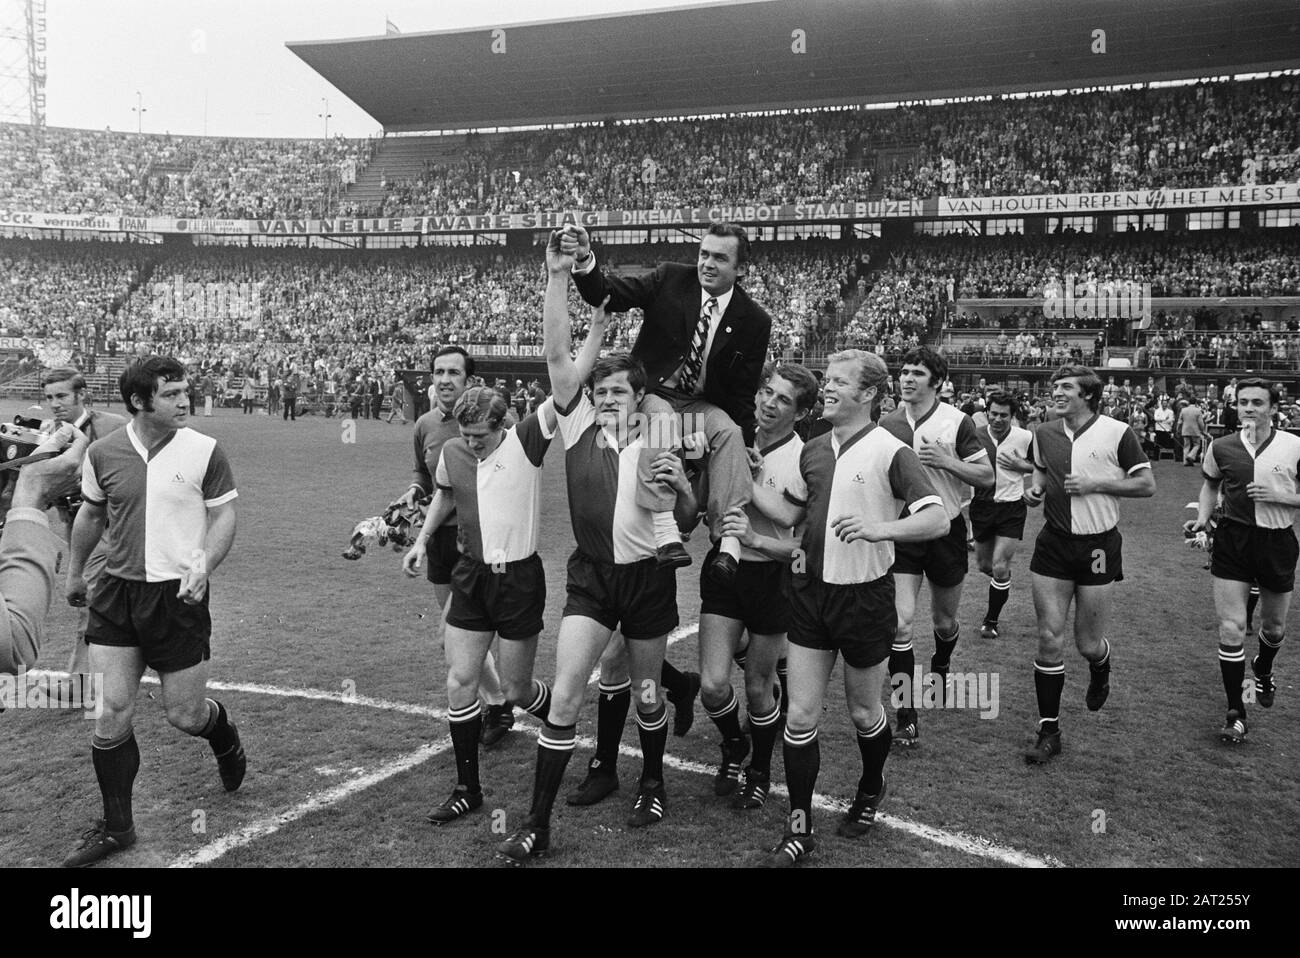 Feijenoord against Holland-Sport 8-2; Ernst Happel is taken on shoulders by players Date: May 10, 1970 Keywords: shoulders, sports, trainers, football Personal Name: Ernst Happel, Holland Sport Institution name: Feyenoord Stock Photo